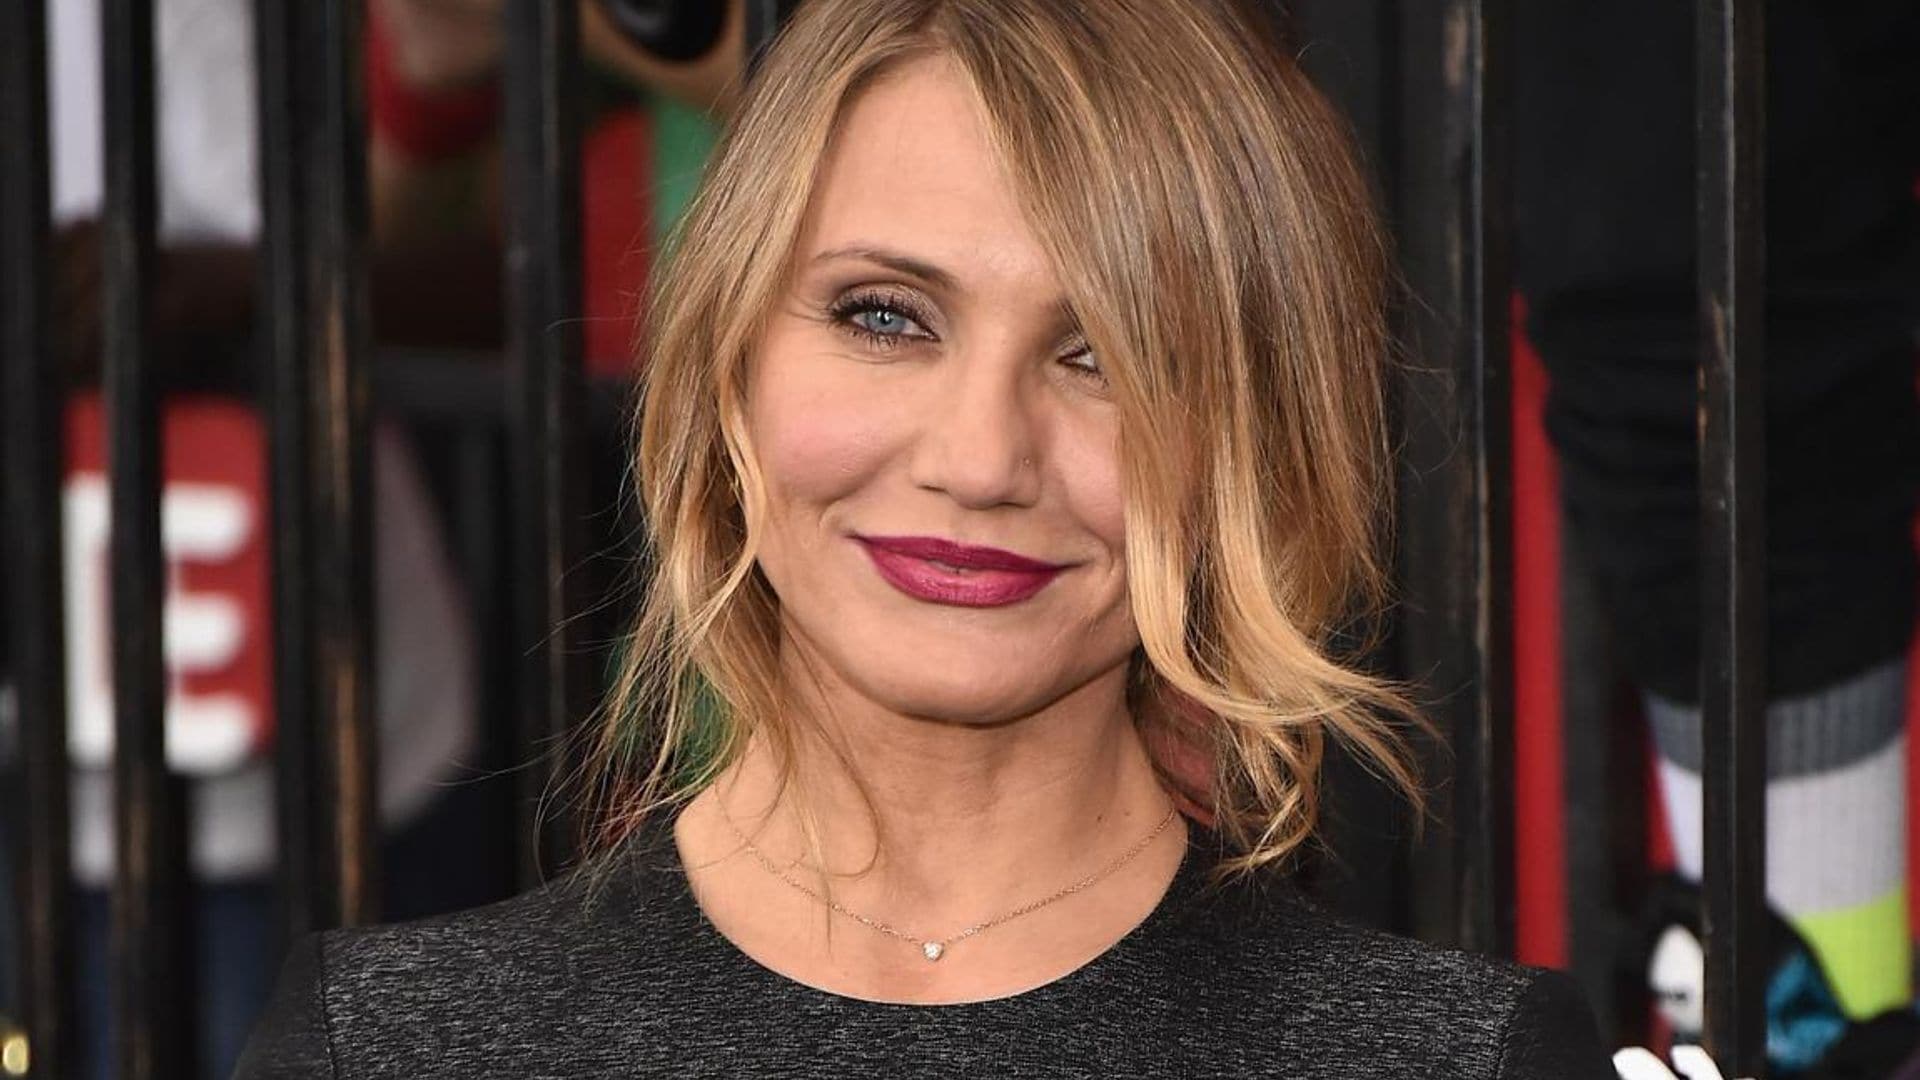 Cameron Diaz jokes about the pressure of starting a family in the 'second half' of her life